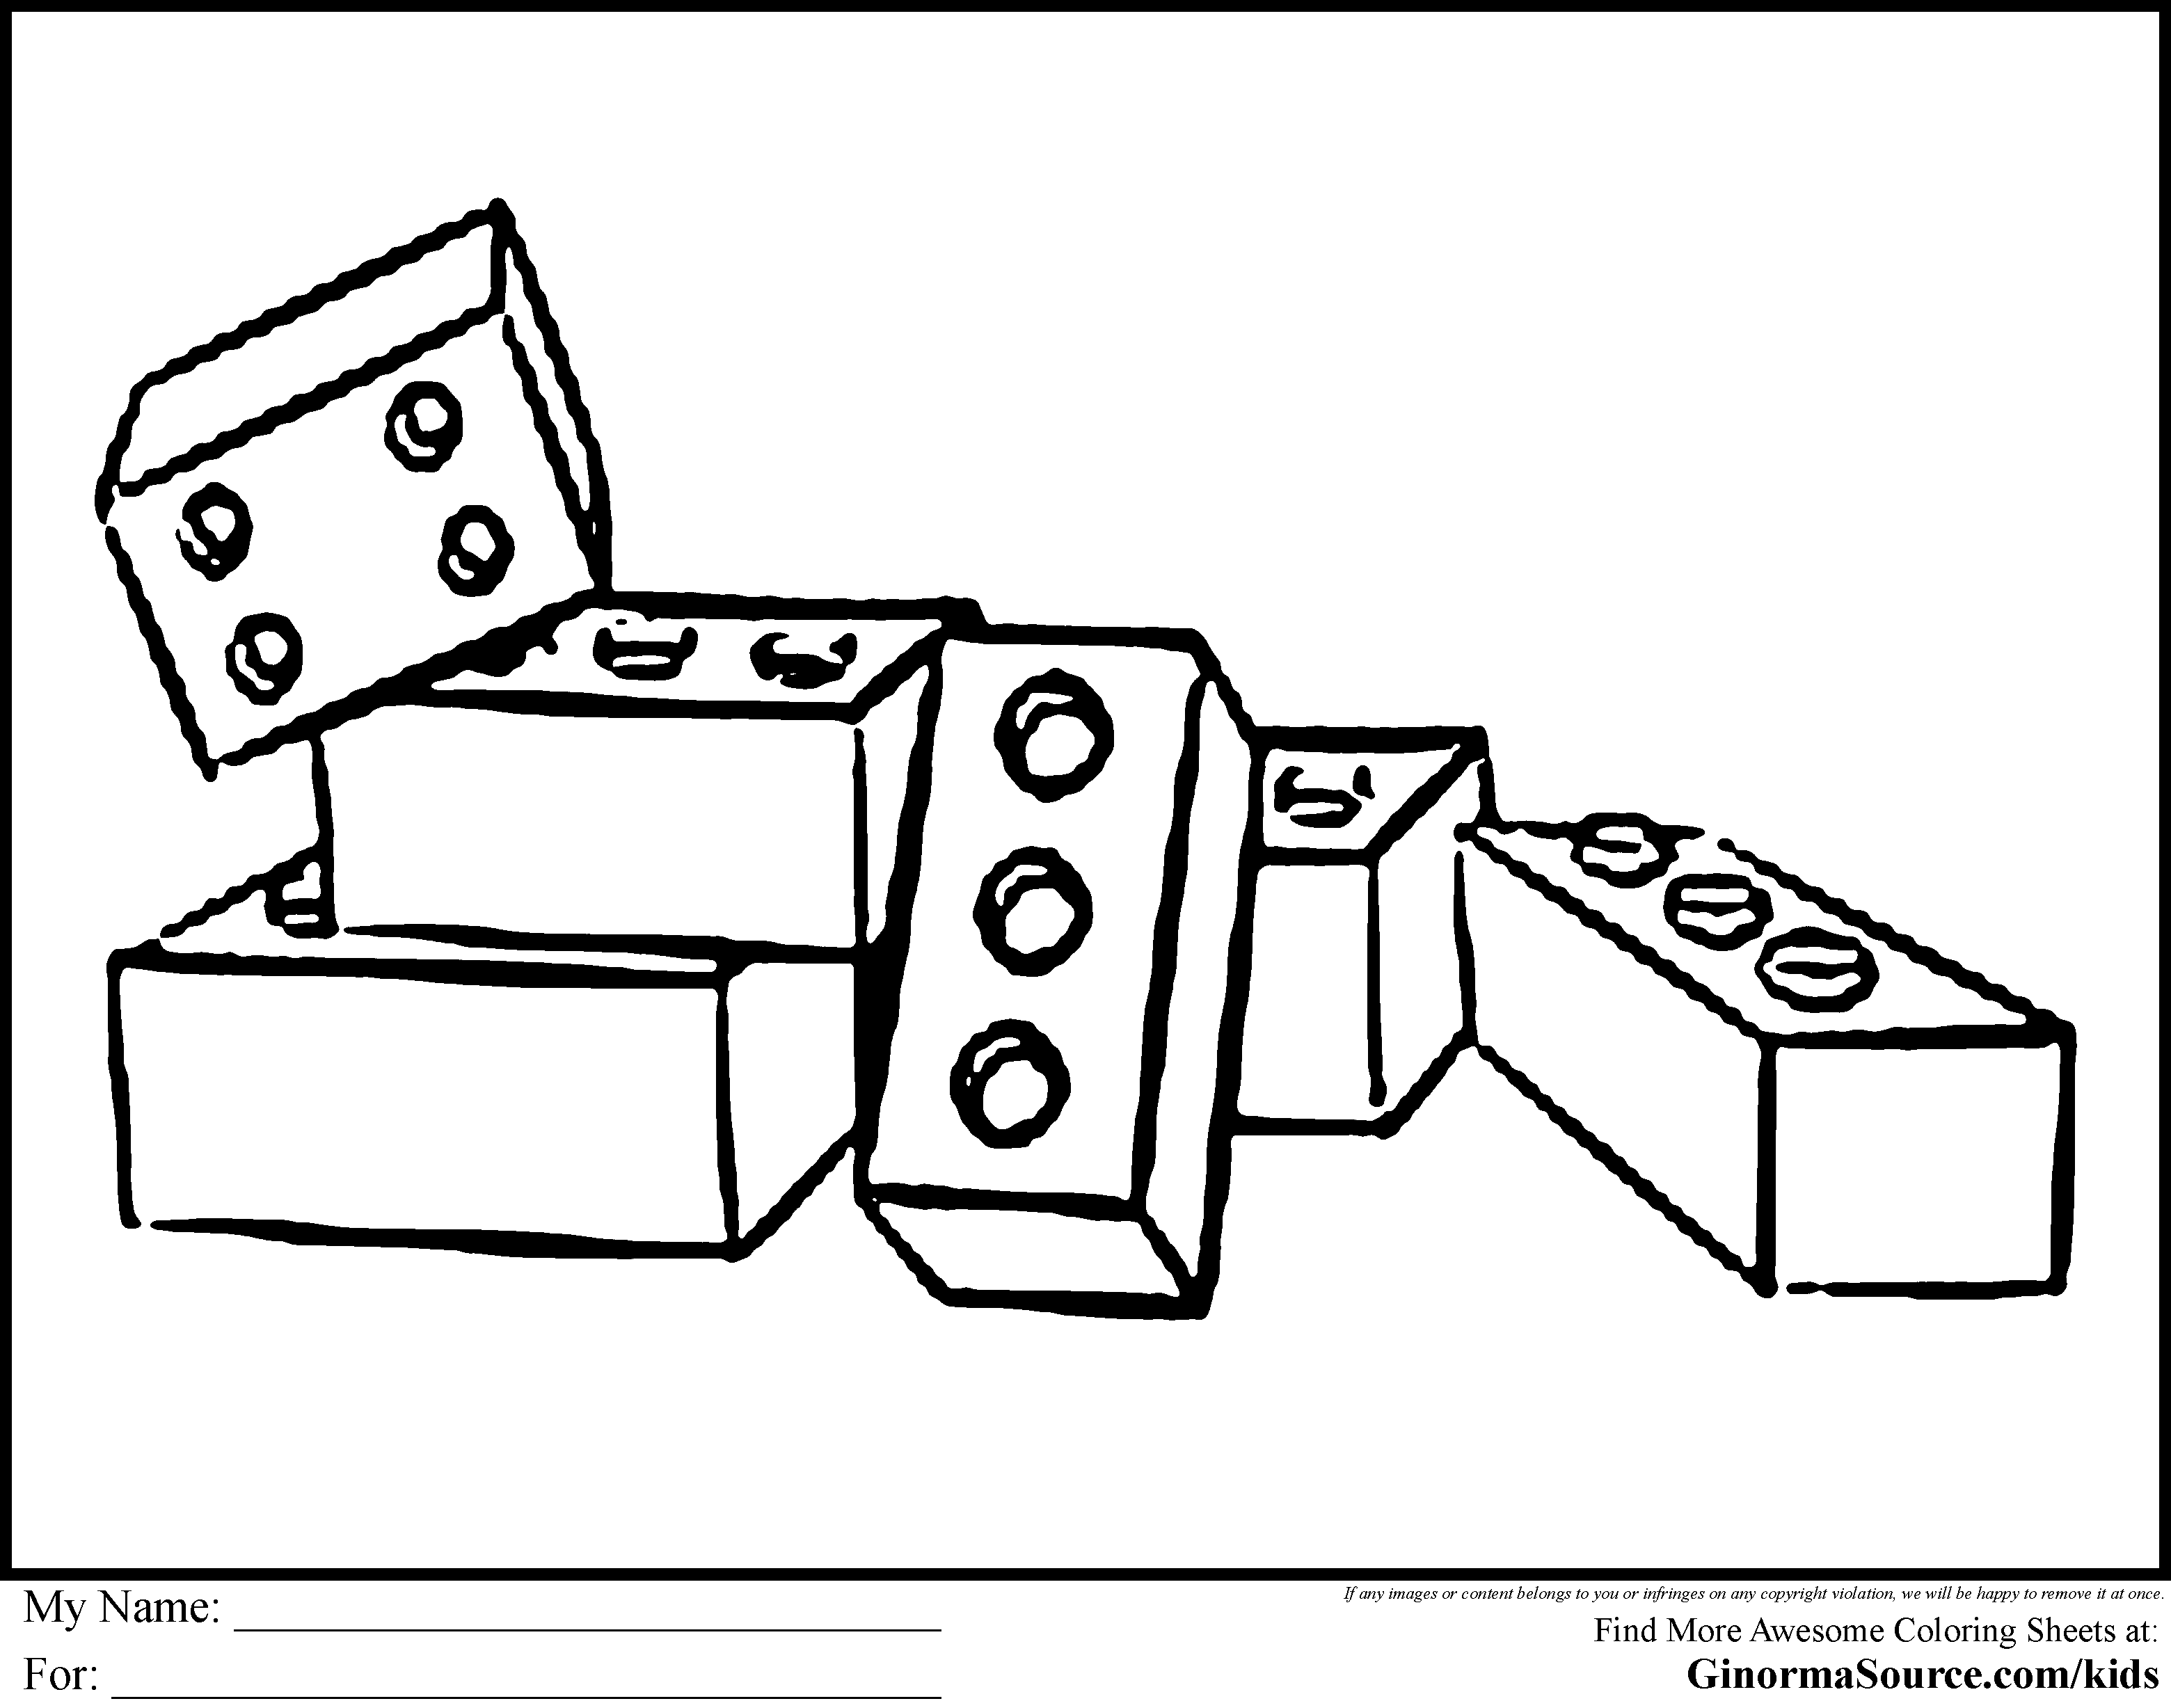 Lego Blocks Coloring Pages - HiColoringPages